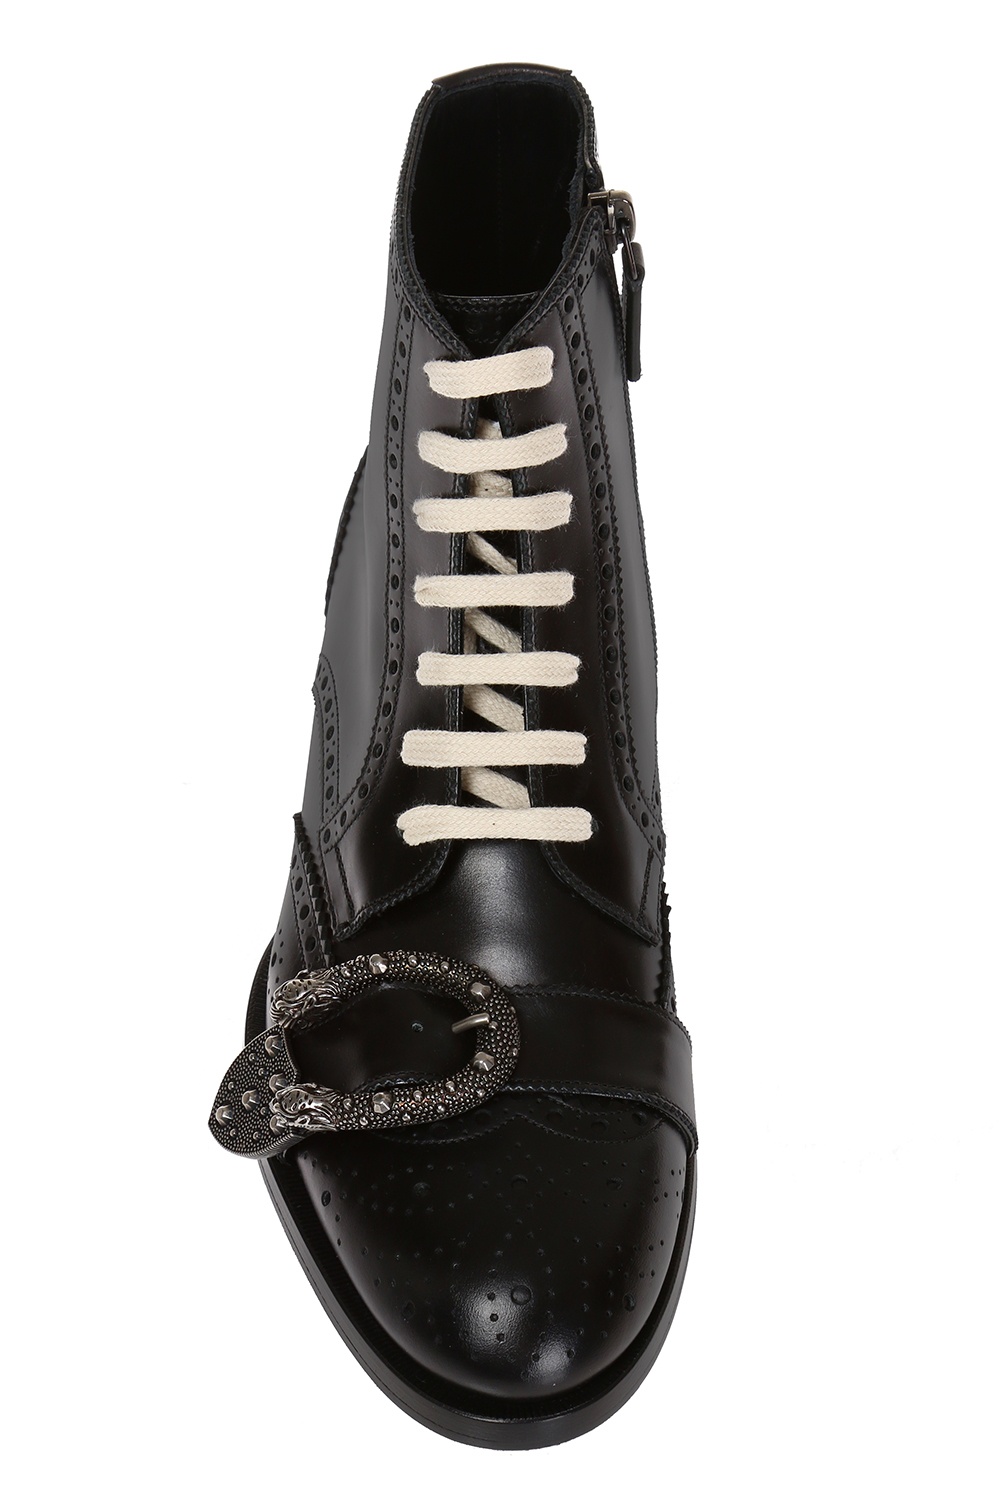 gucci queercore boots 10 